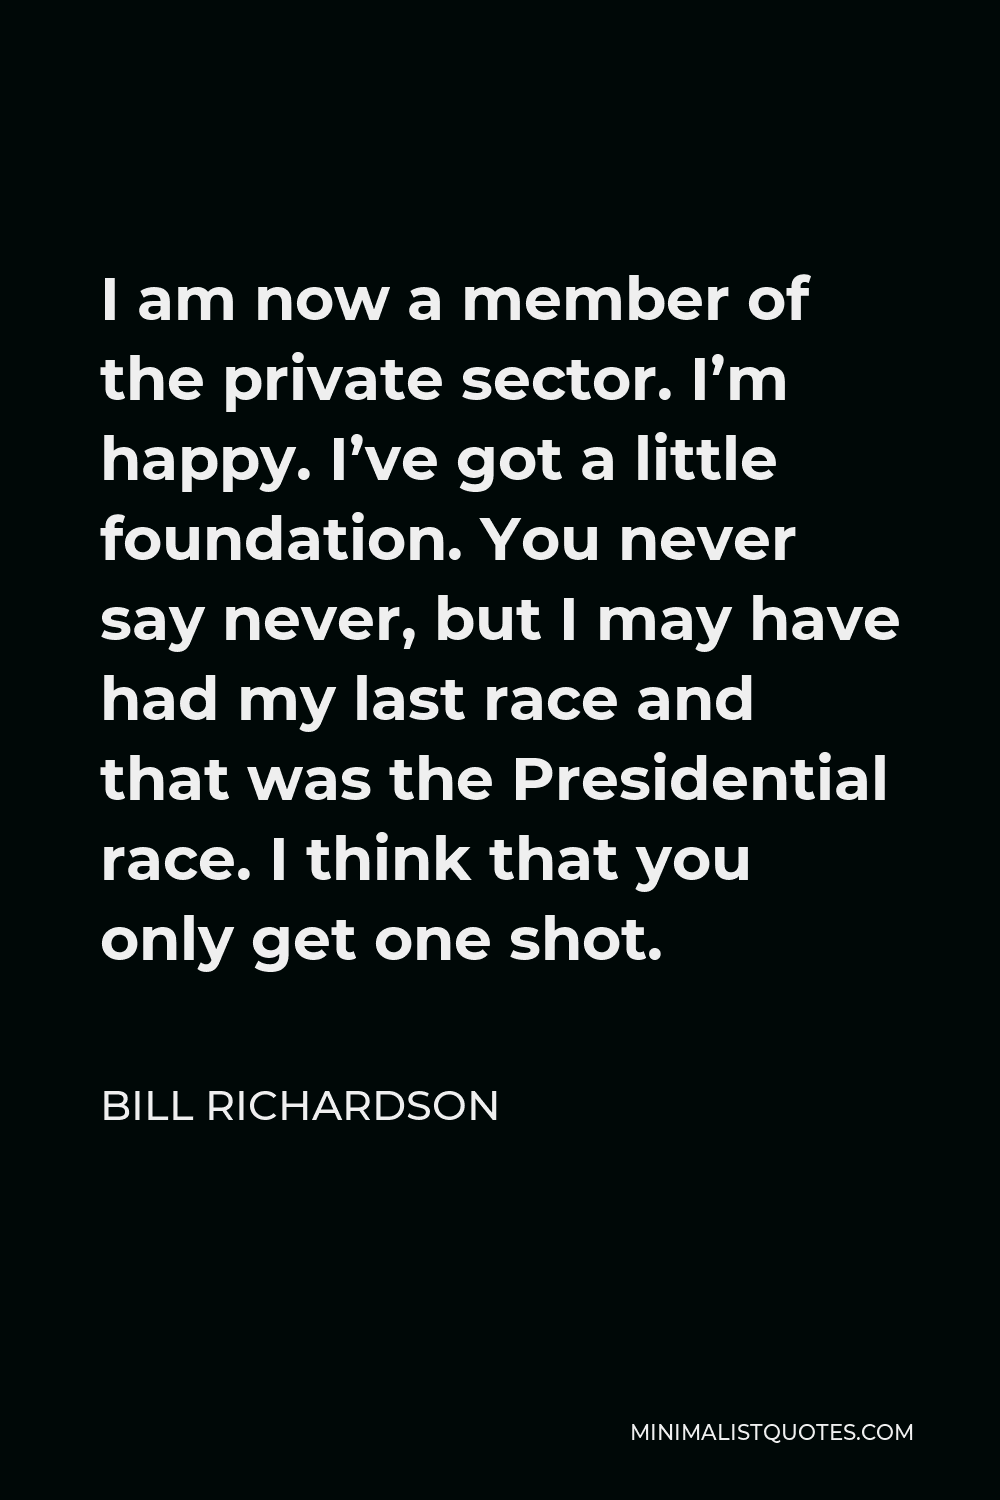 Bill Richardson Quote - I am now a member of the private sector. I’m happy. I’ve got a little foundation. You never say never, but I may have had my last race and that was the Presidential race. I think that you only get one shot.